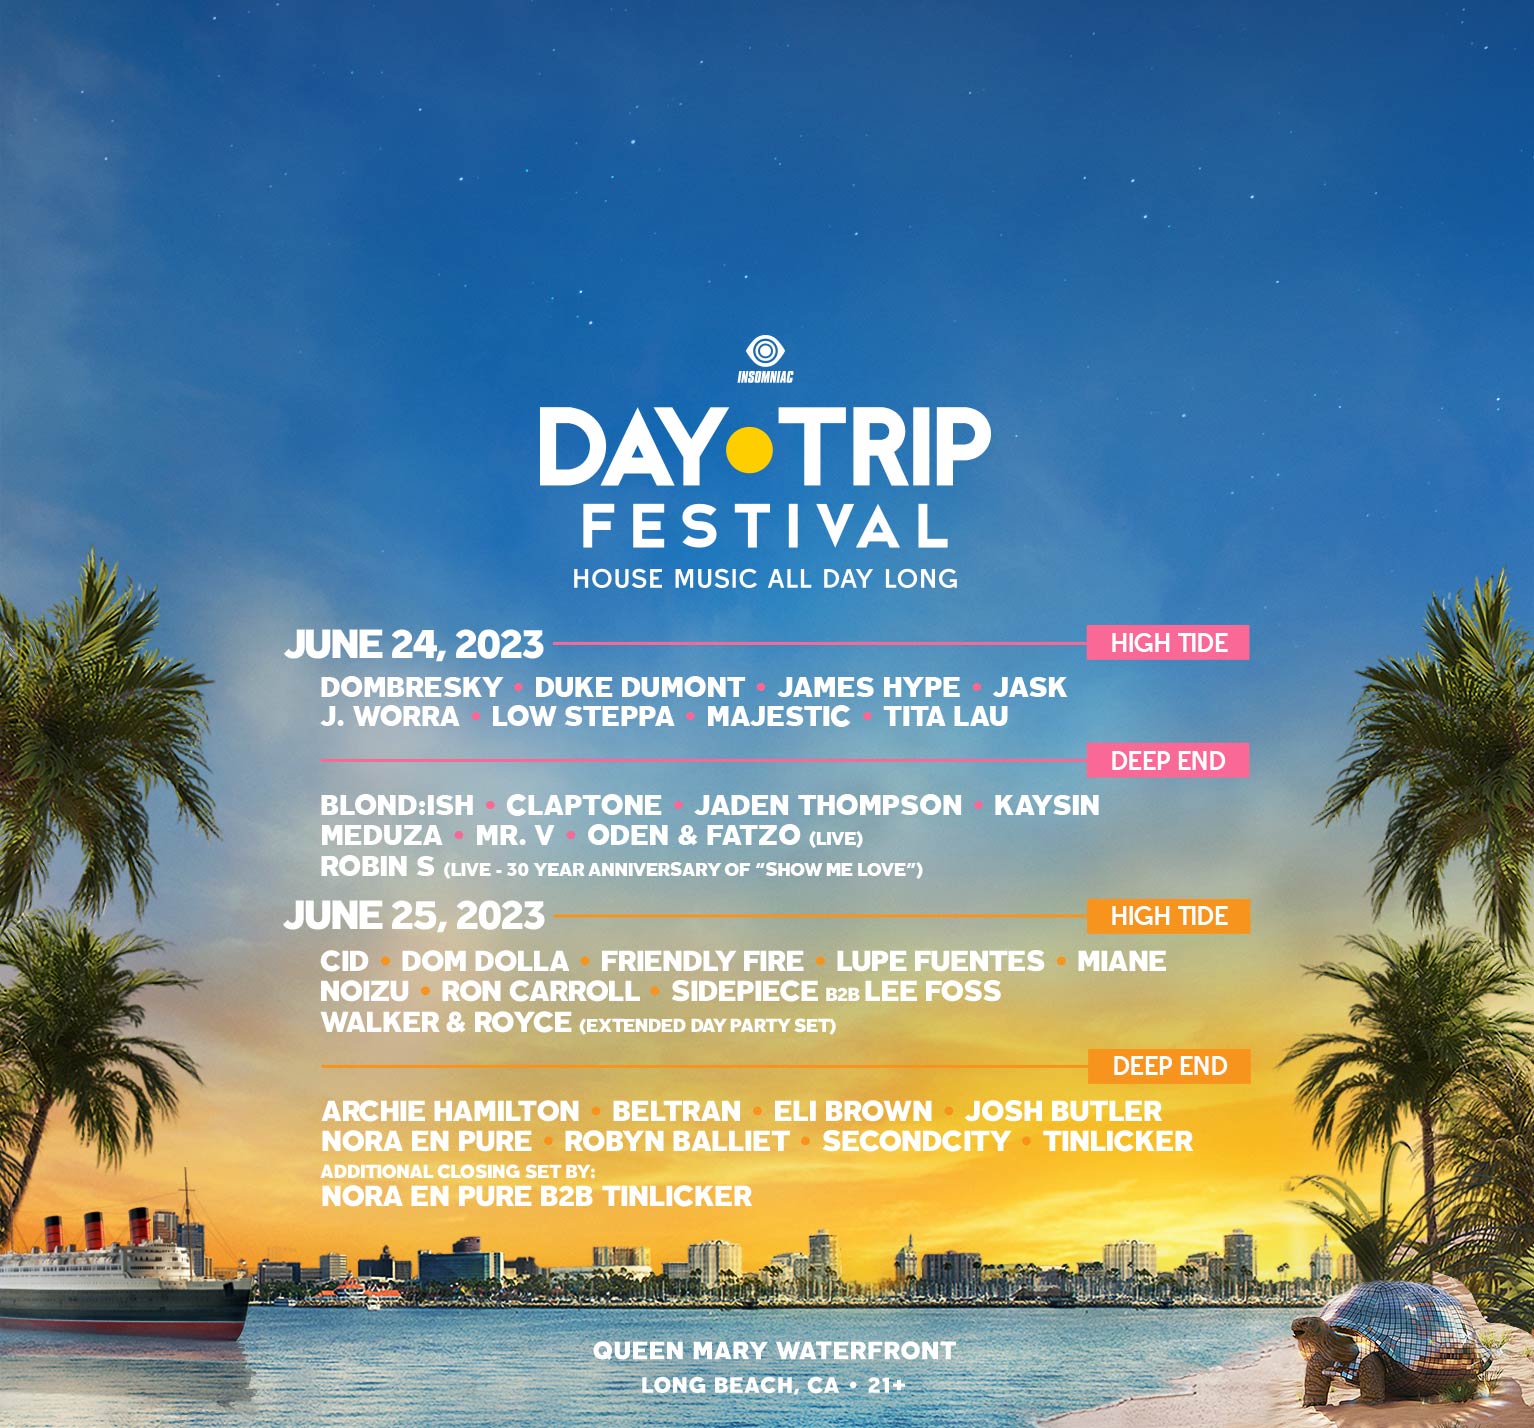 Day Trip Festival June 24+25, 2023 Queen Mary Waterfront